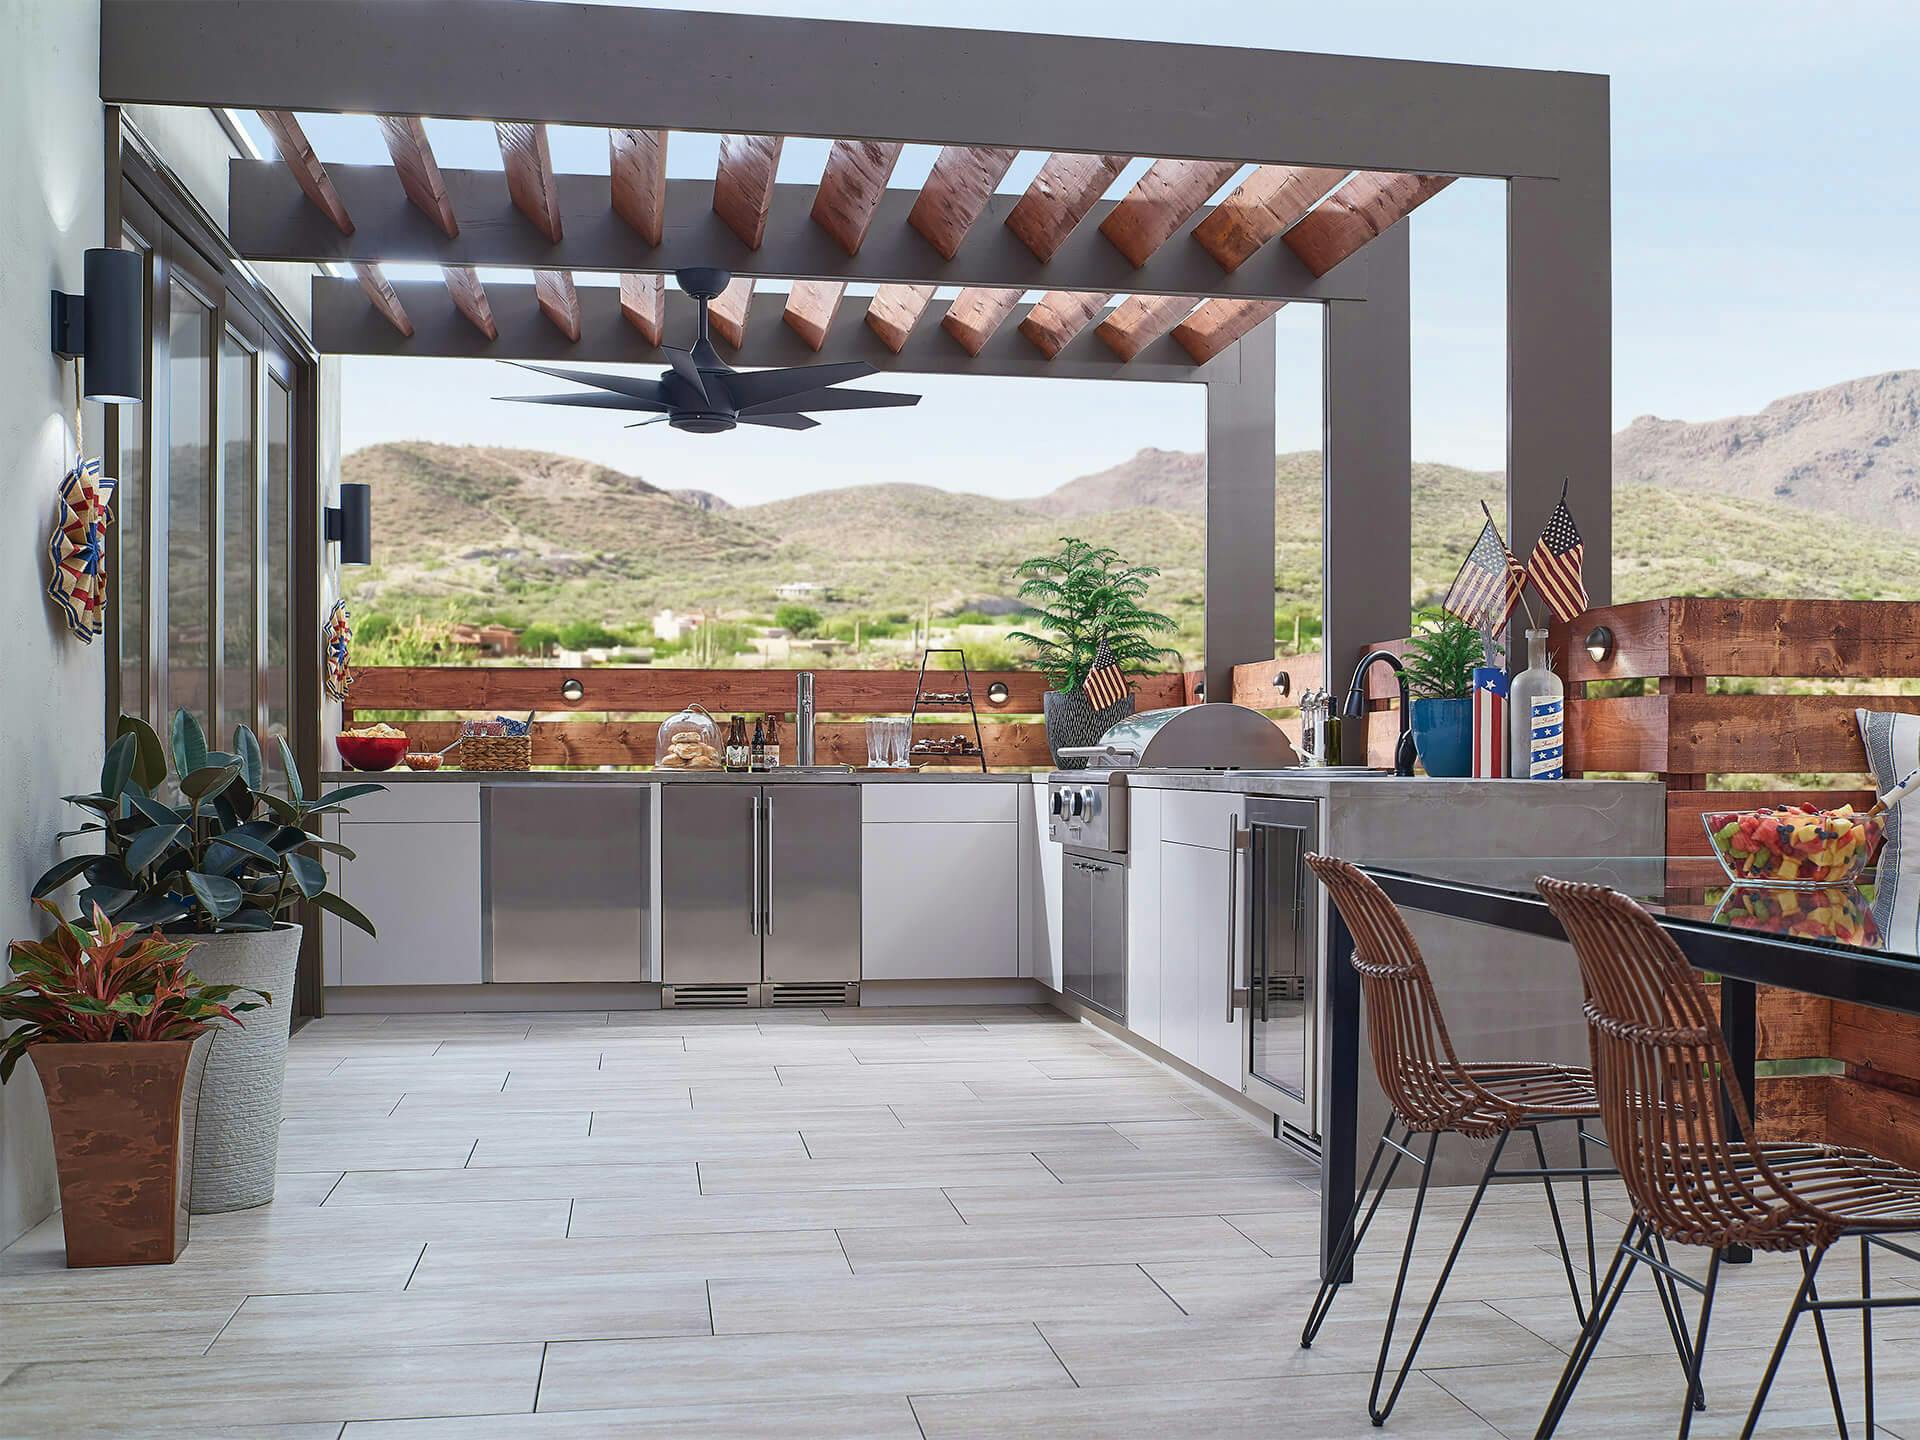 Exterior image of an outdoor kitchen with a Lehrll fan in the day 